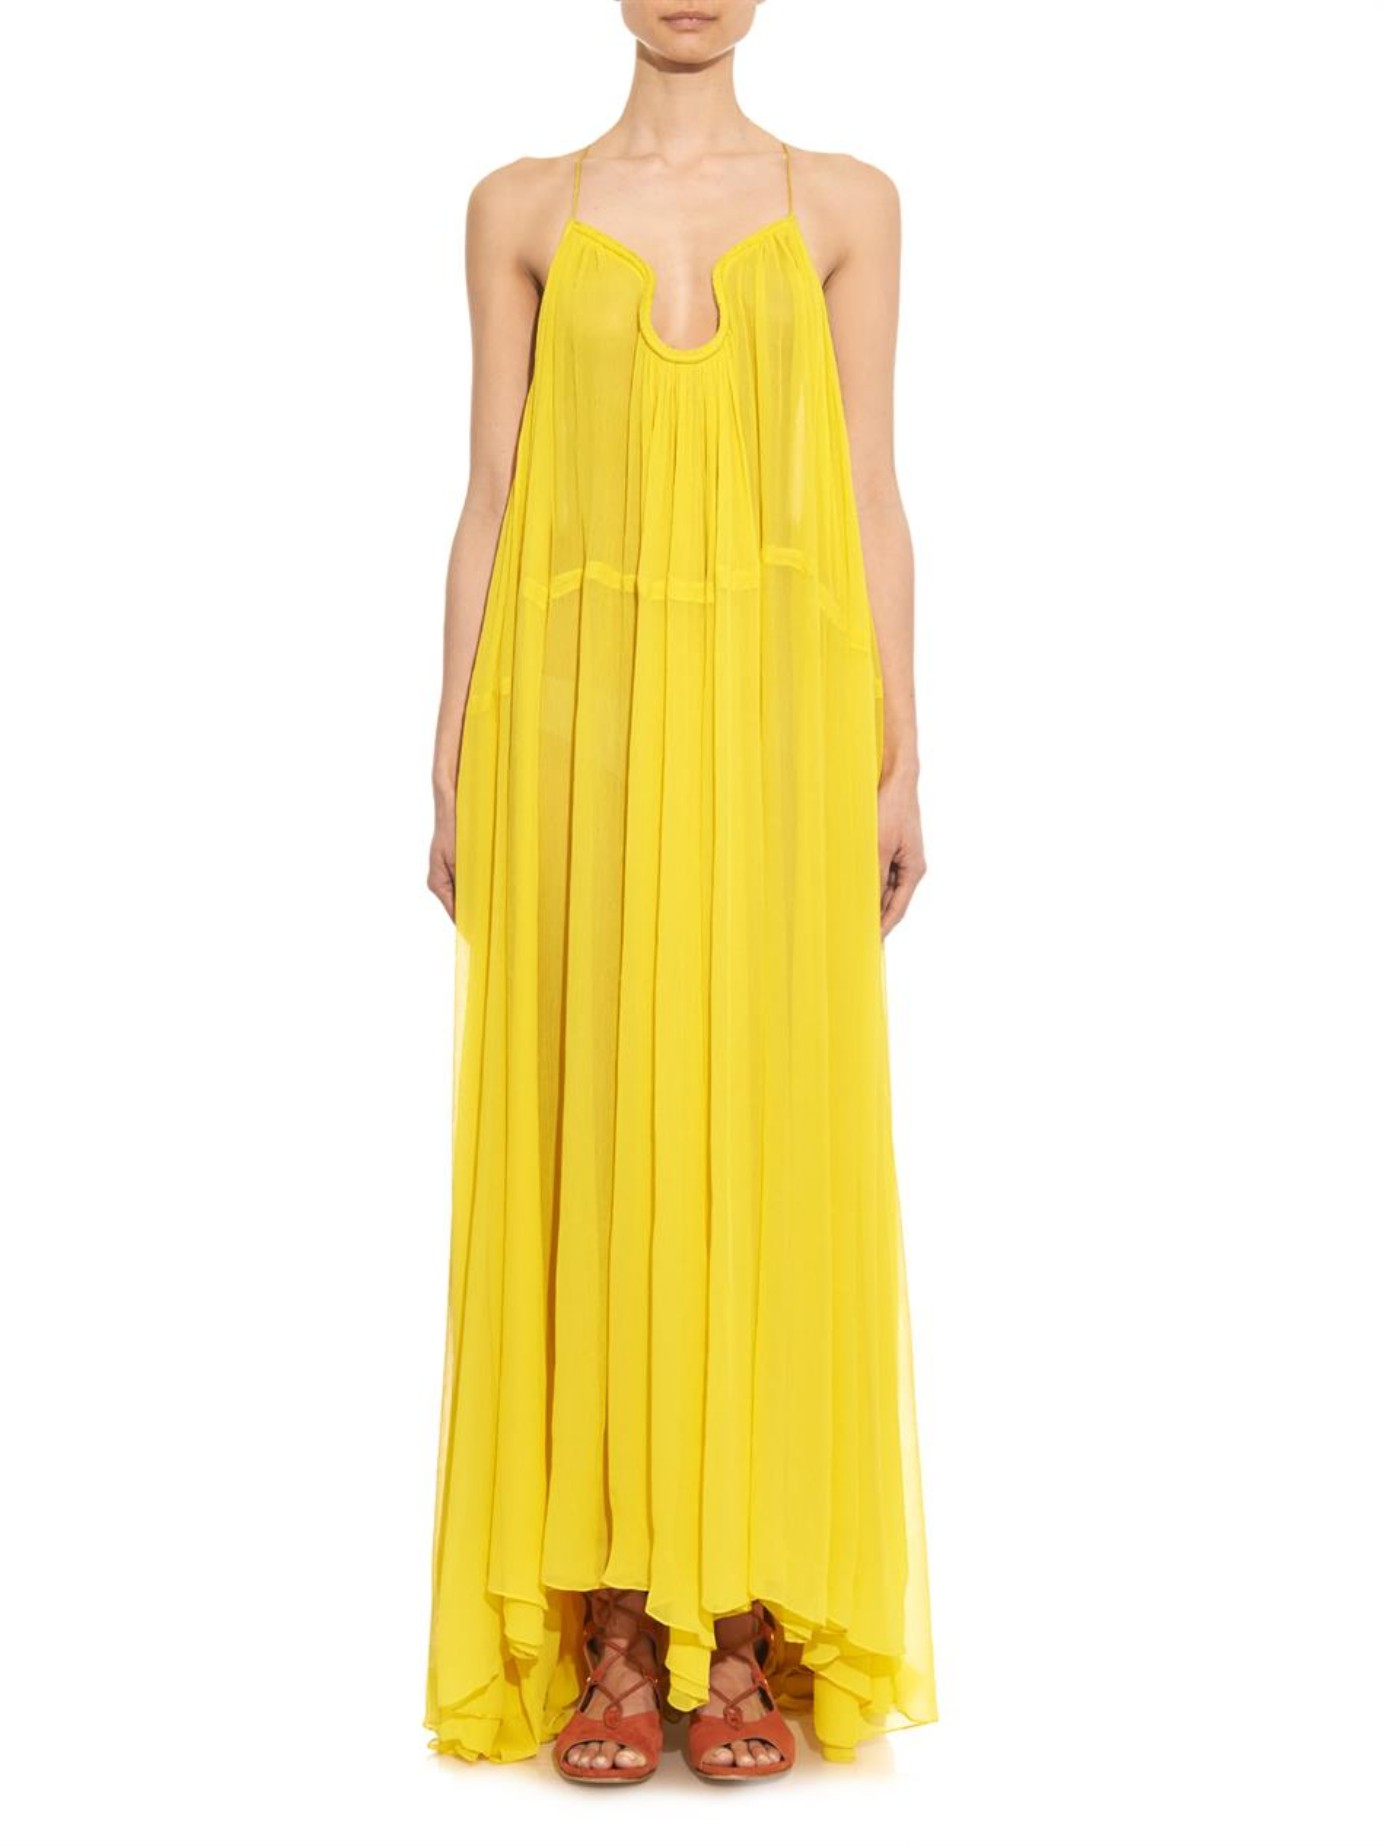 Chloé Silk-Voile Maxi Dress in Yellow - Lyst